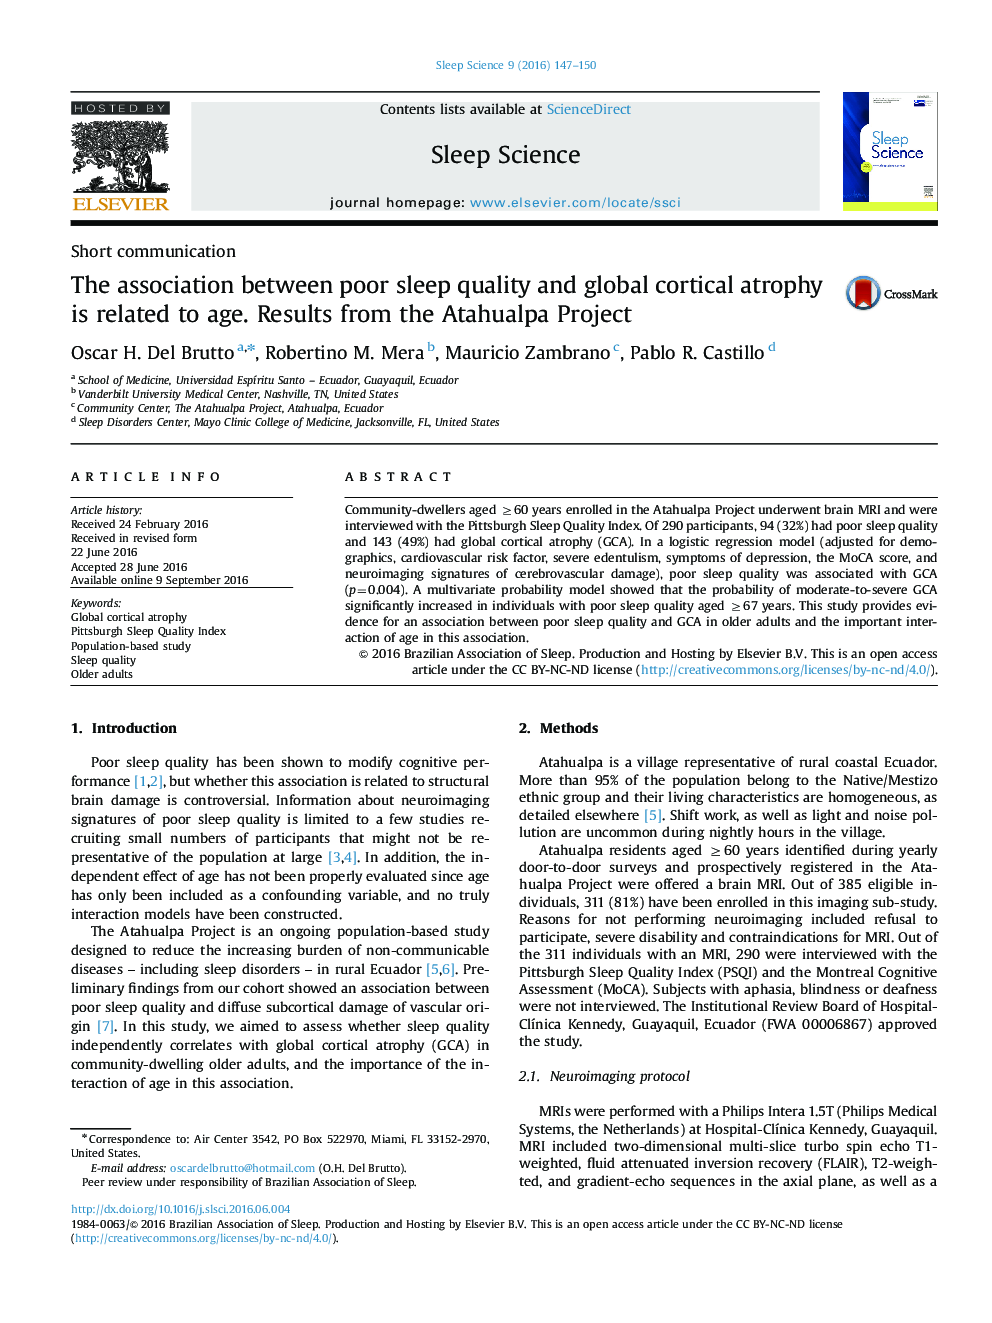 Short communicationThe association between poor sleep quality and global cortical atrophy is related to age. Results from the Atahualpa Project